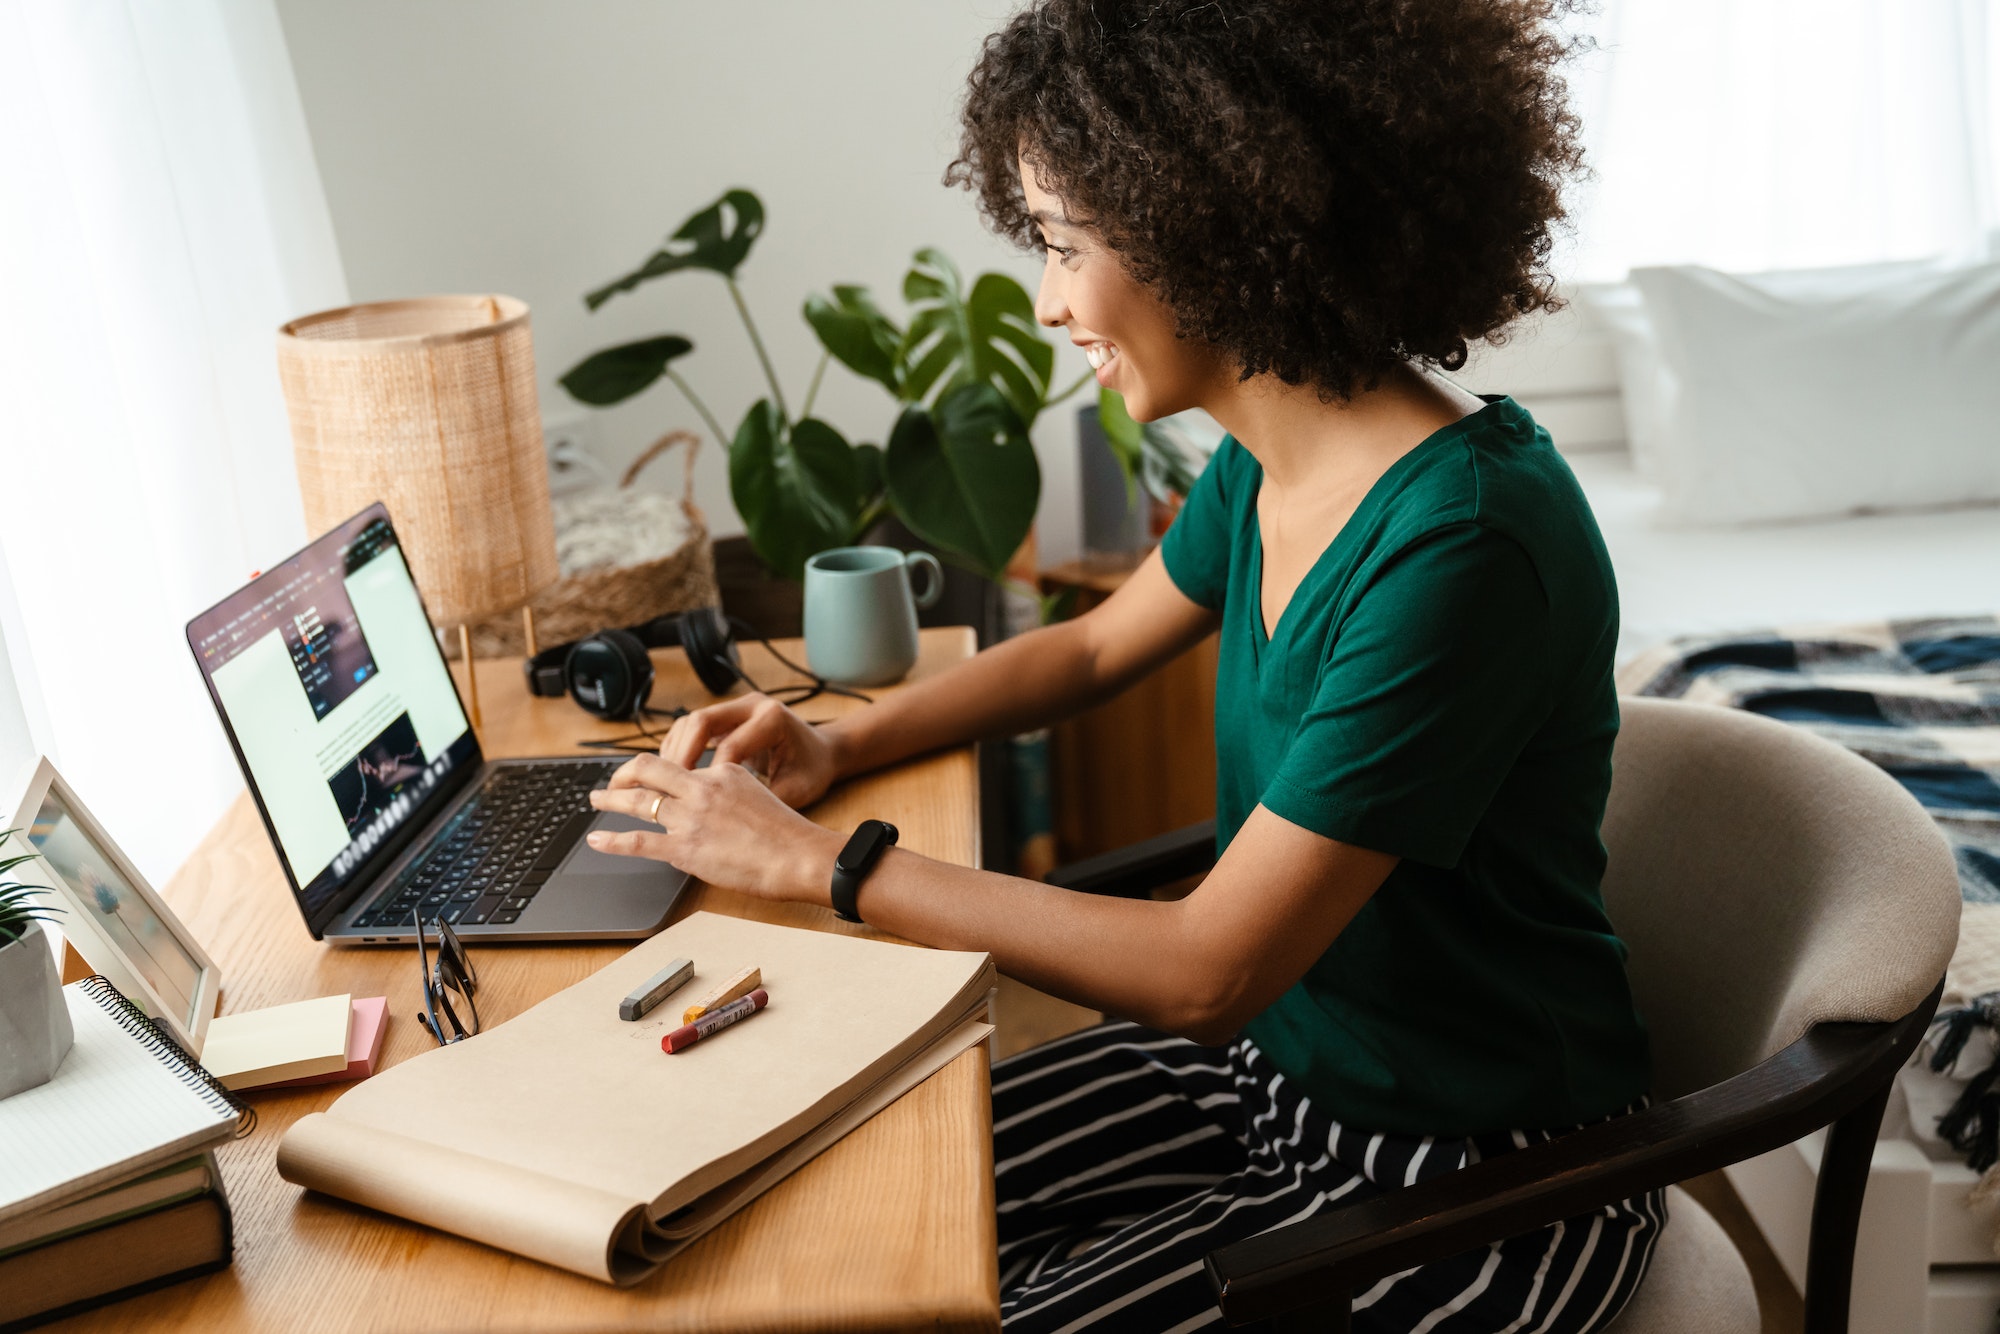 African american young woman sitting at desk and using laptop at home